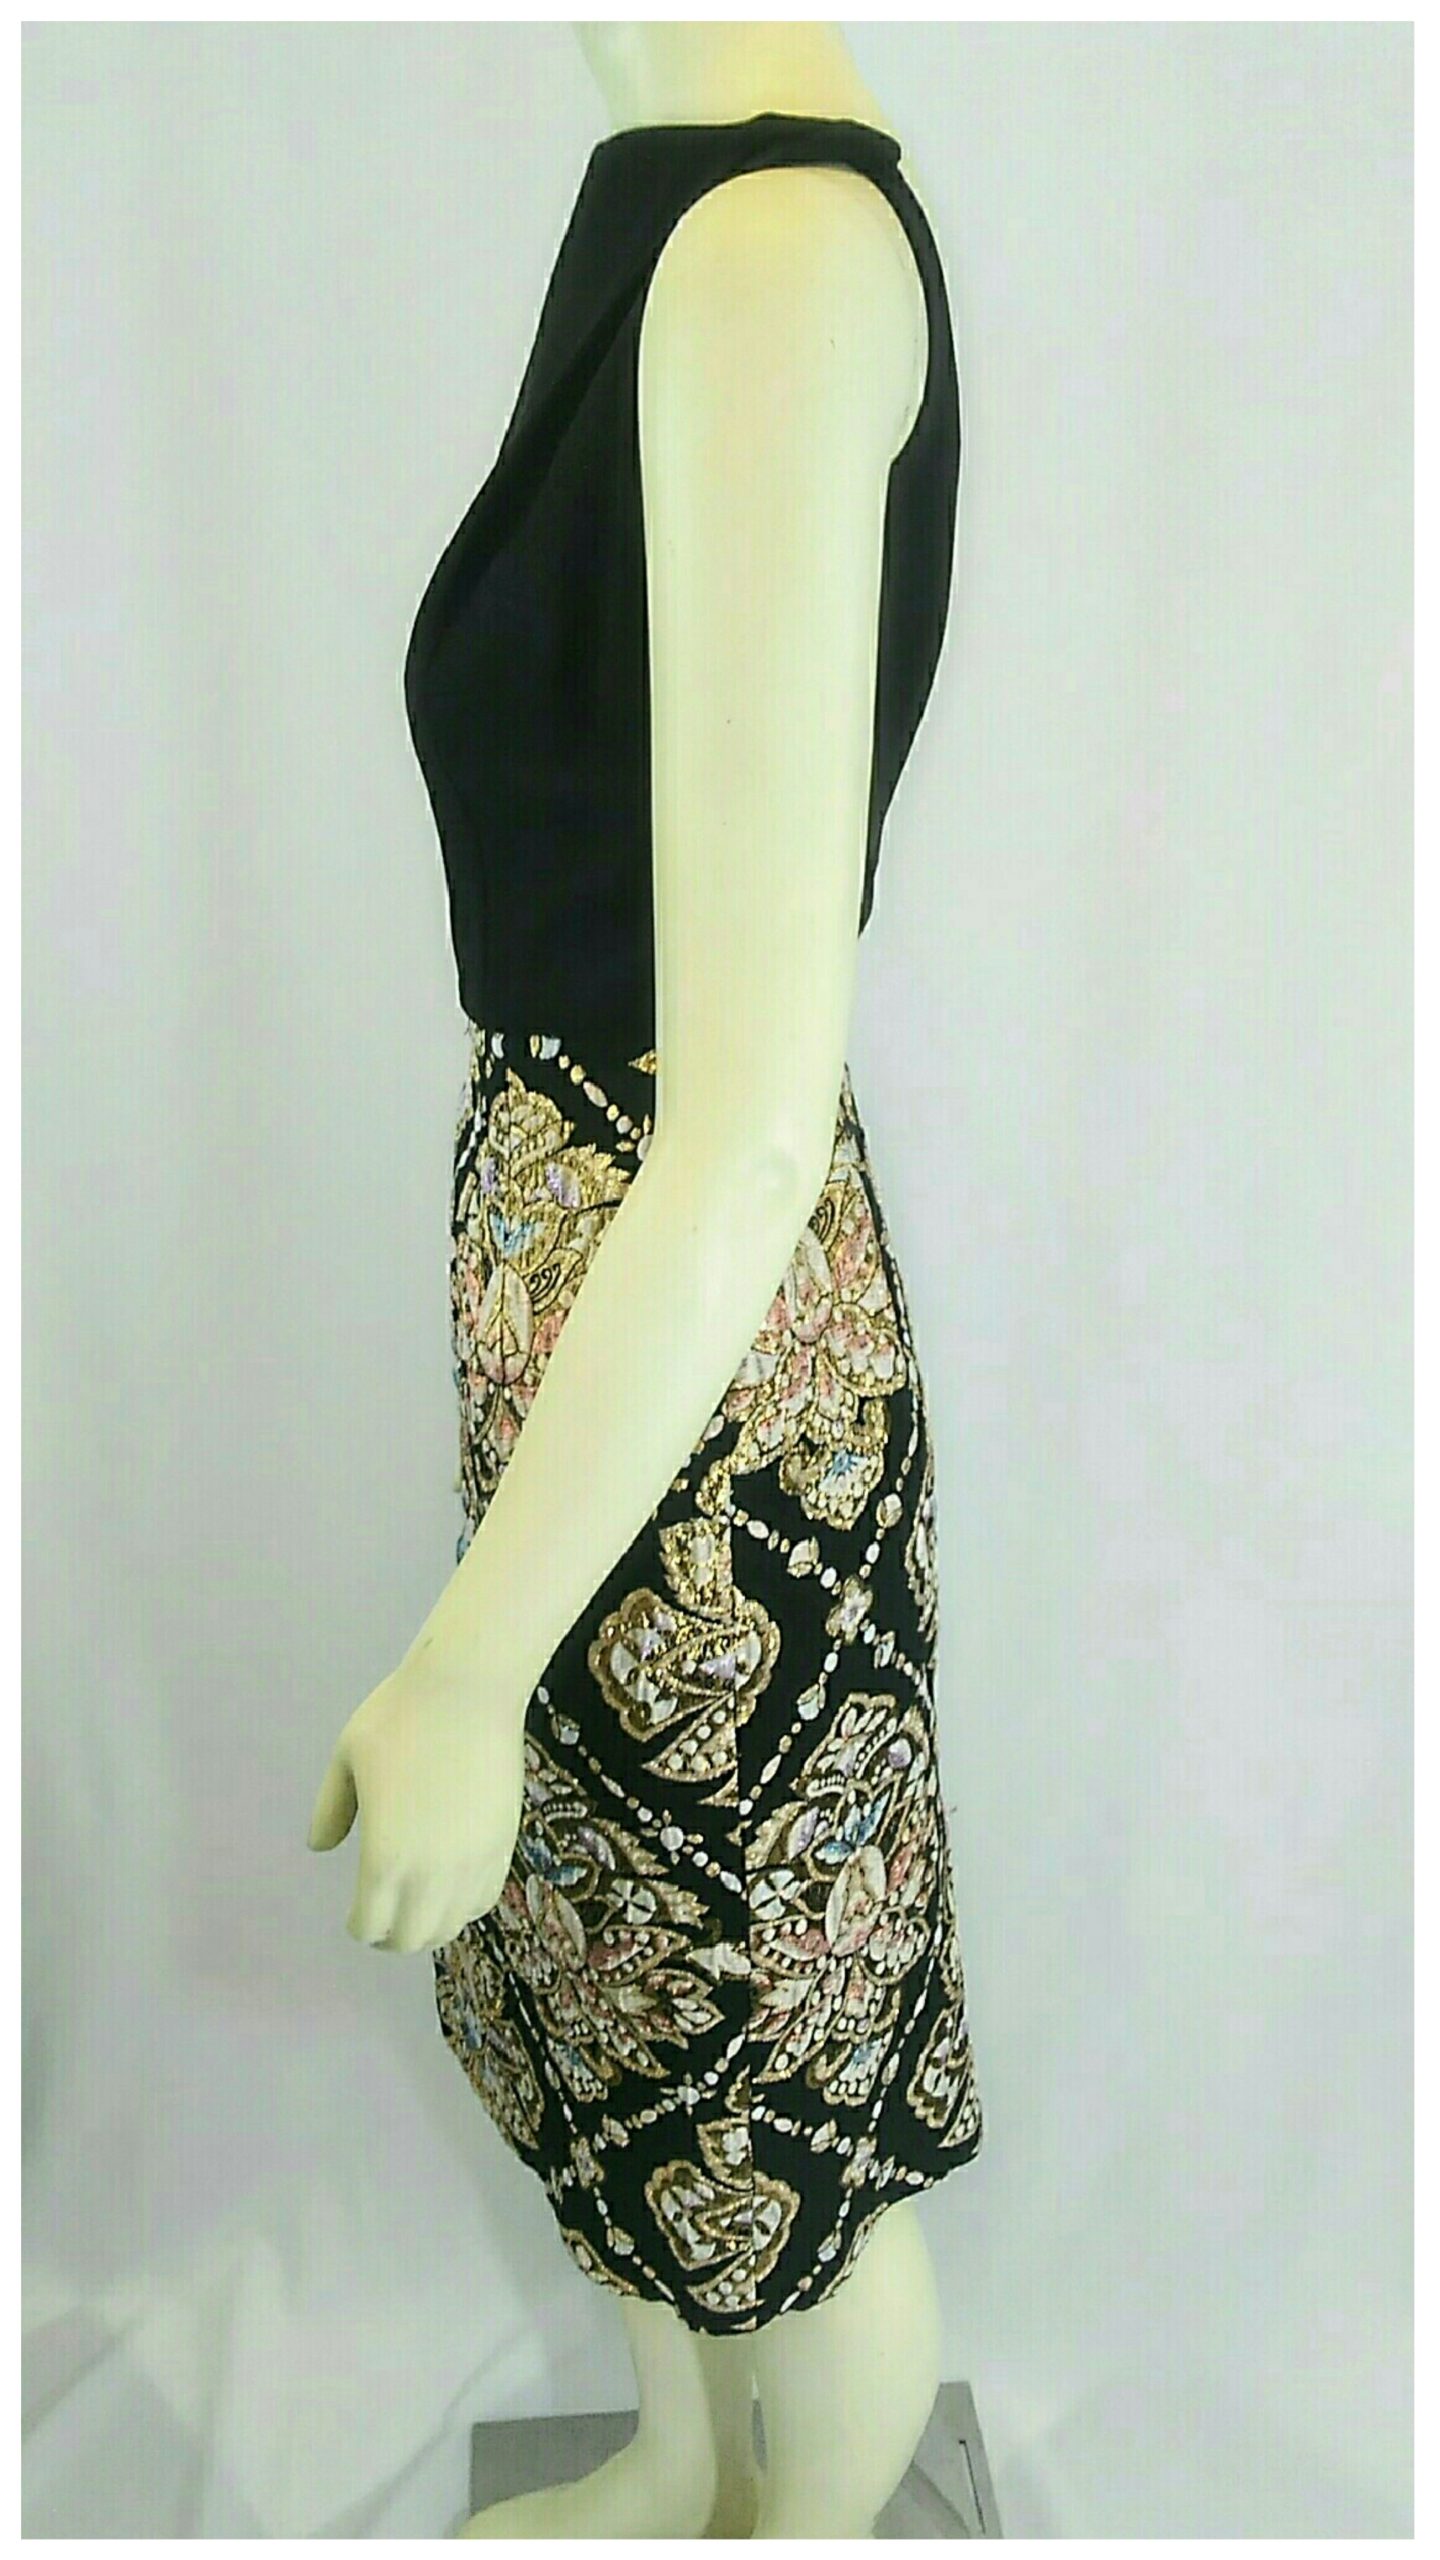 Vintage 50's/60's Rare, Stunning  Black Crepe and Brocade Lame Cocktail Sheath Dress by Jay Herbert of California; 50's Lame Brocade Dress